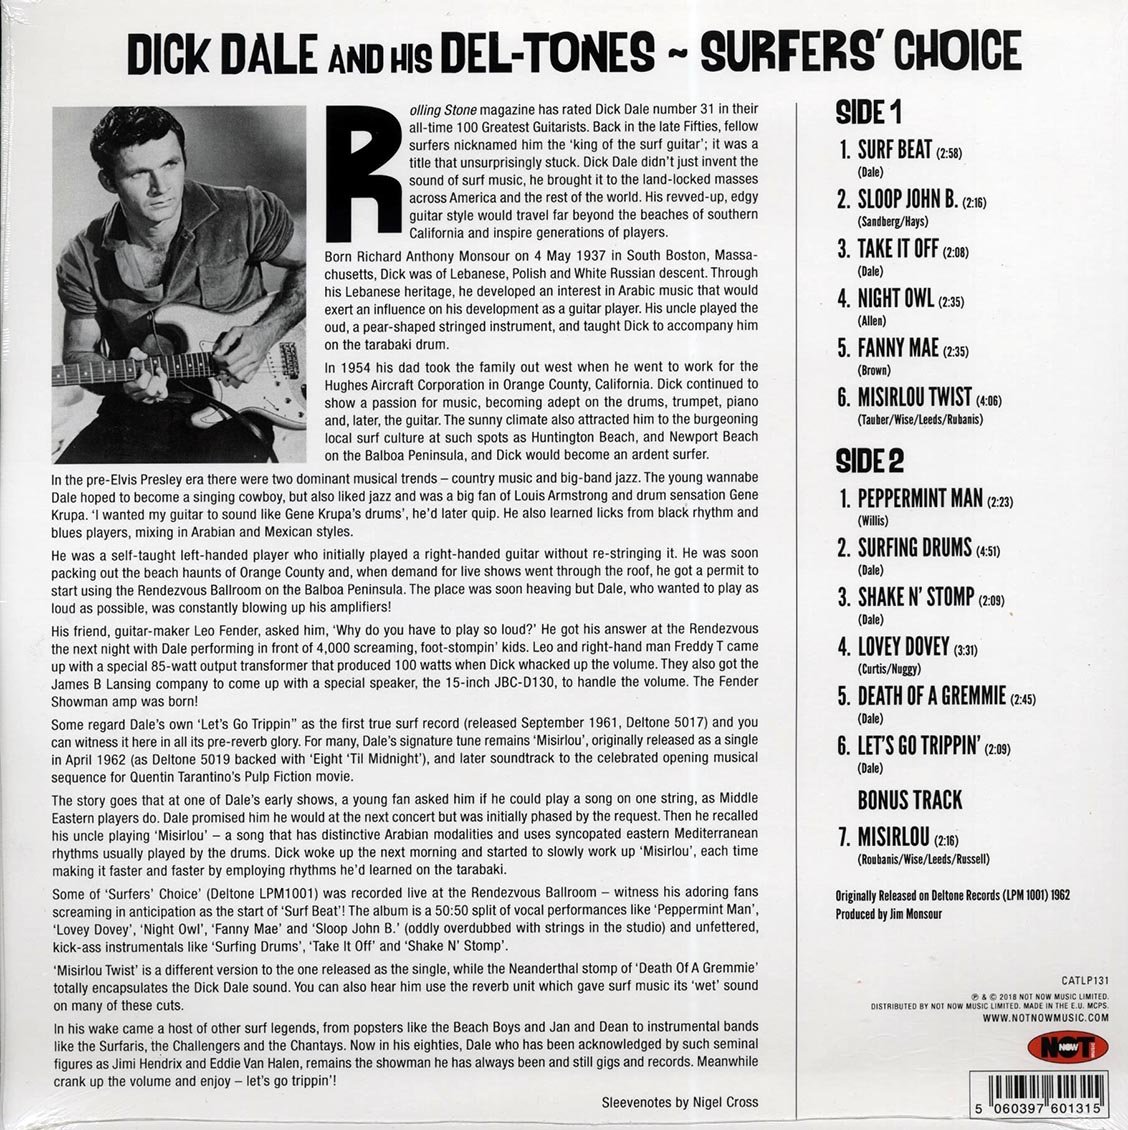 Dick dale wanted louder amps